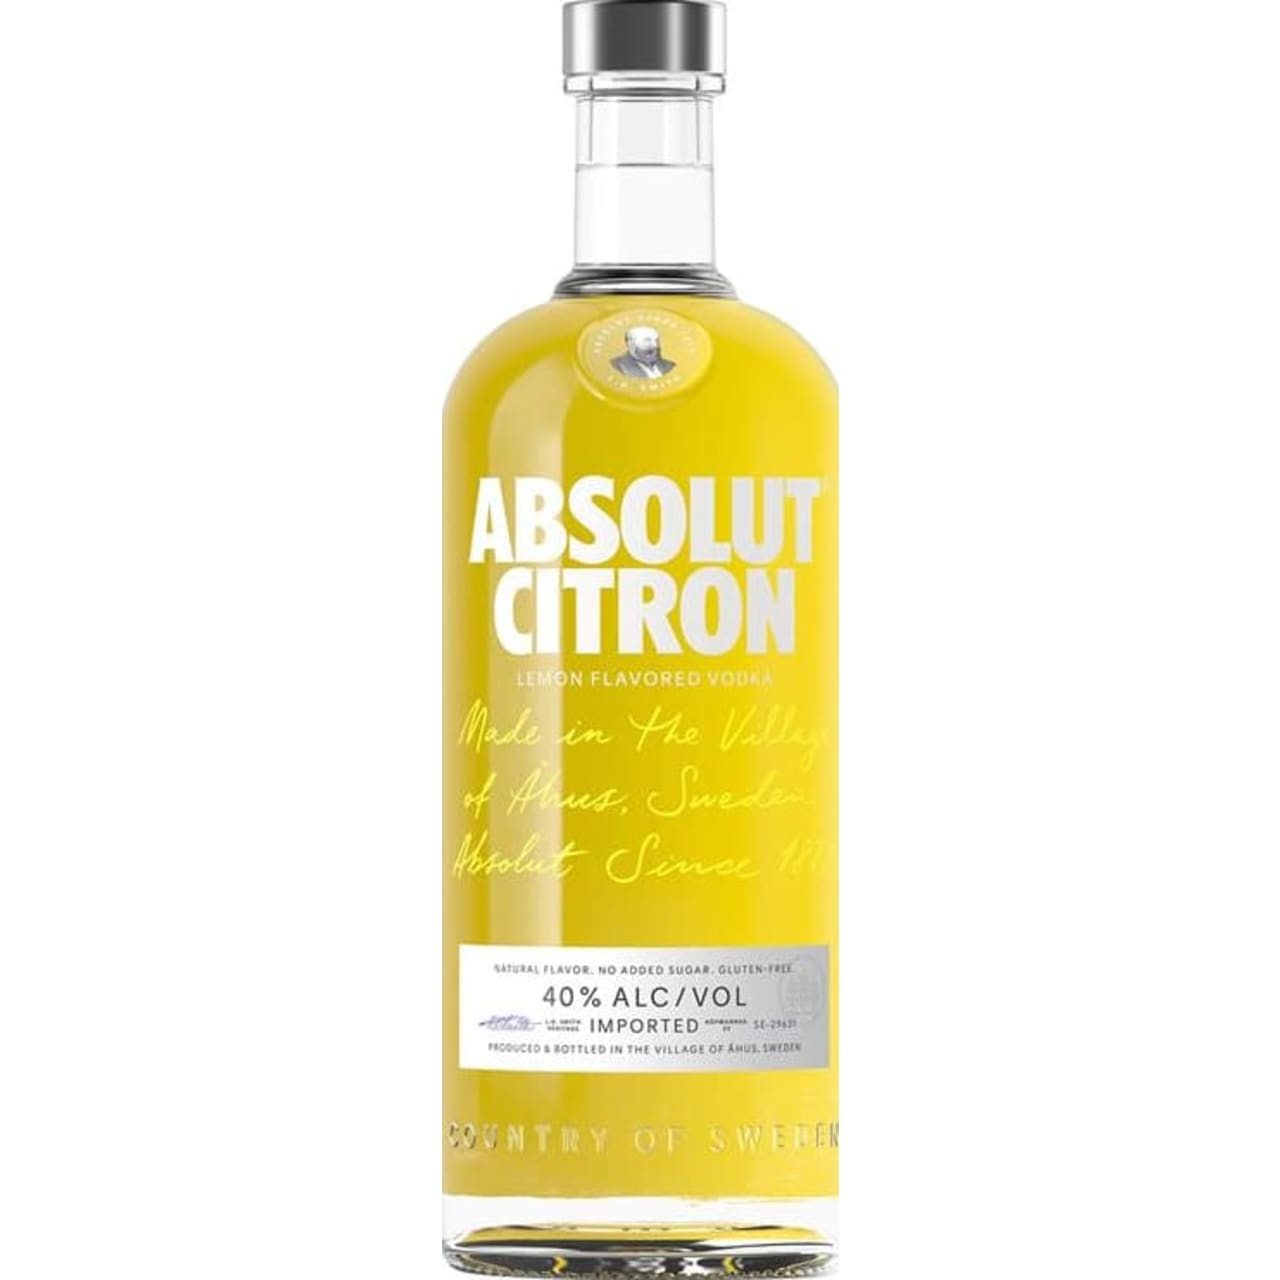 Vibrant and fresh aroma of Absolut Citron showcases a straightforward and well-balanced lemon flavoured vodka.